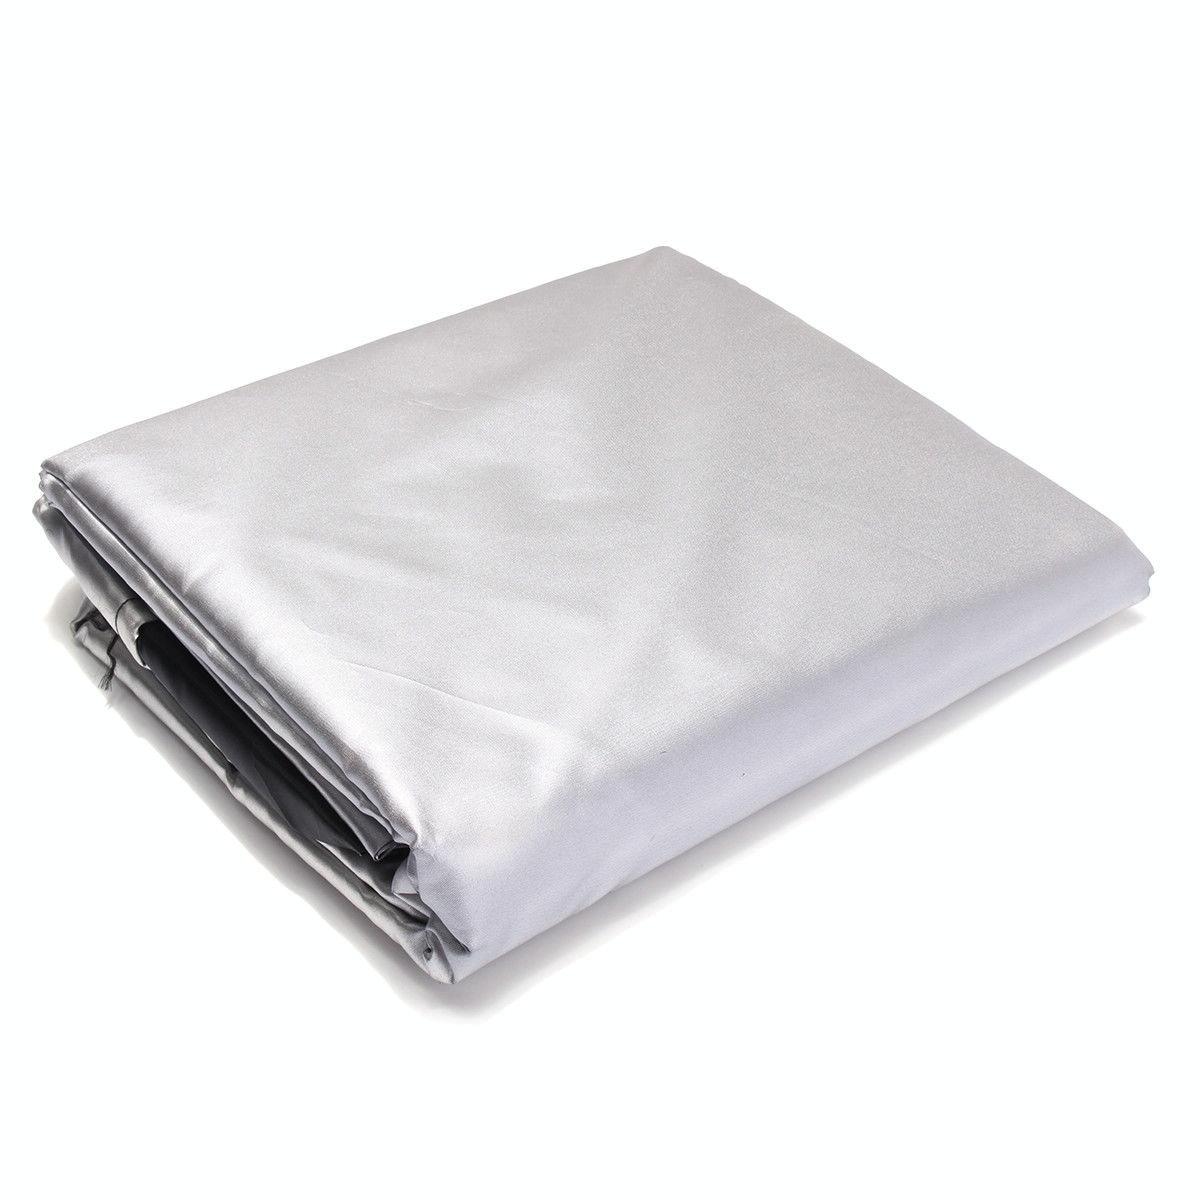 210D Oxford Cloth Boat Propeller Engine Waterproof and Dustproof Cover, Size:56x30x40cm/15-30HP(Silver)